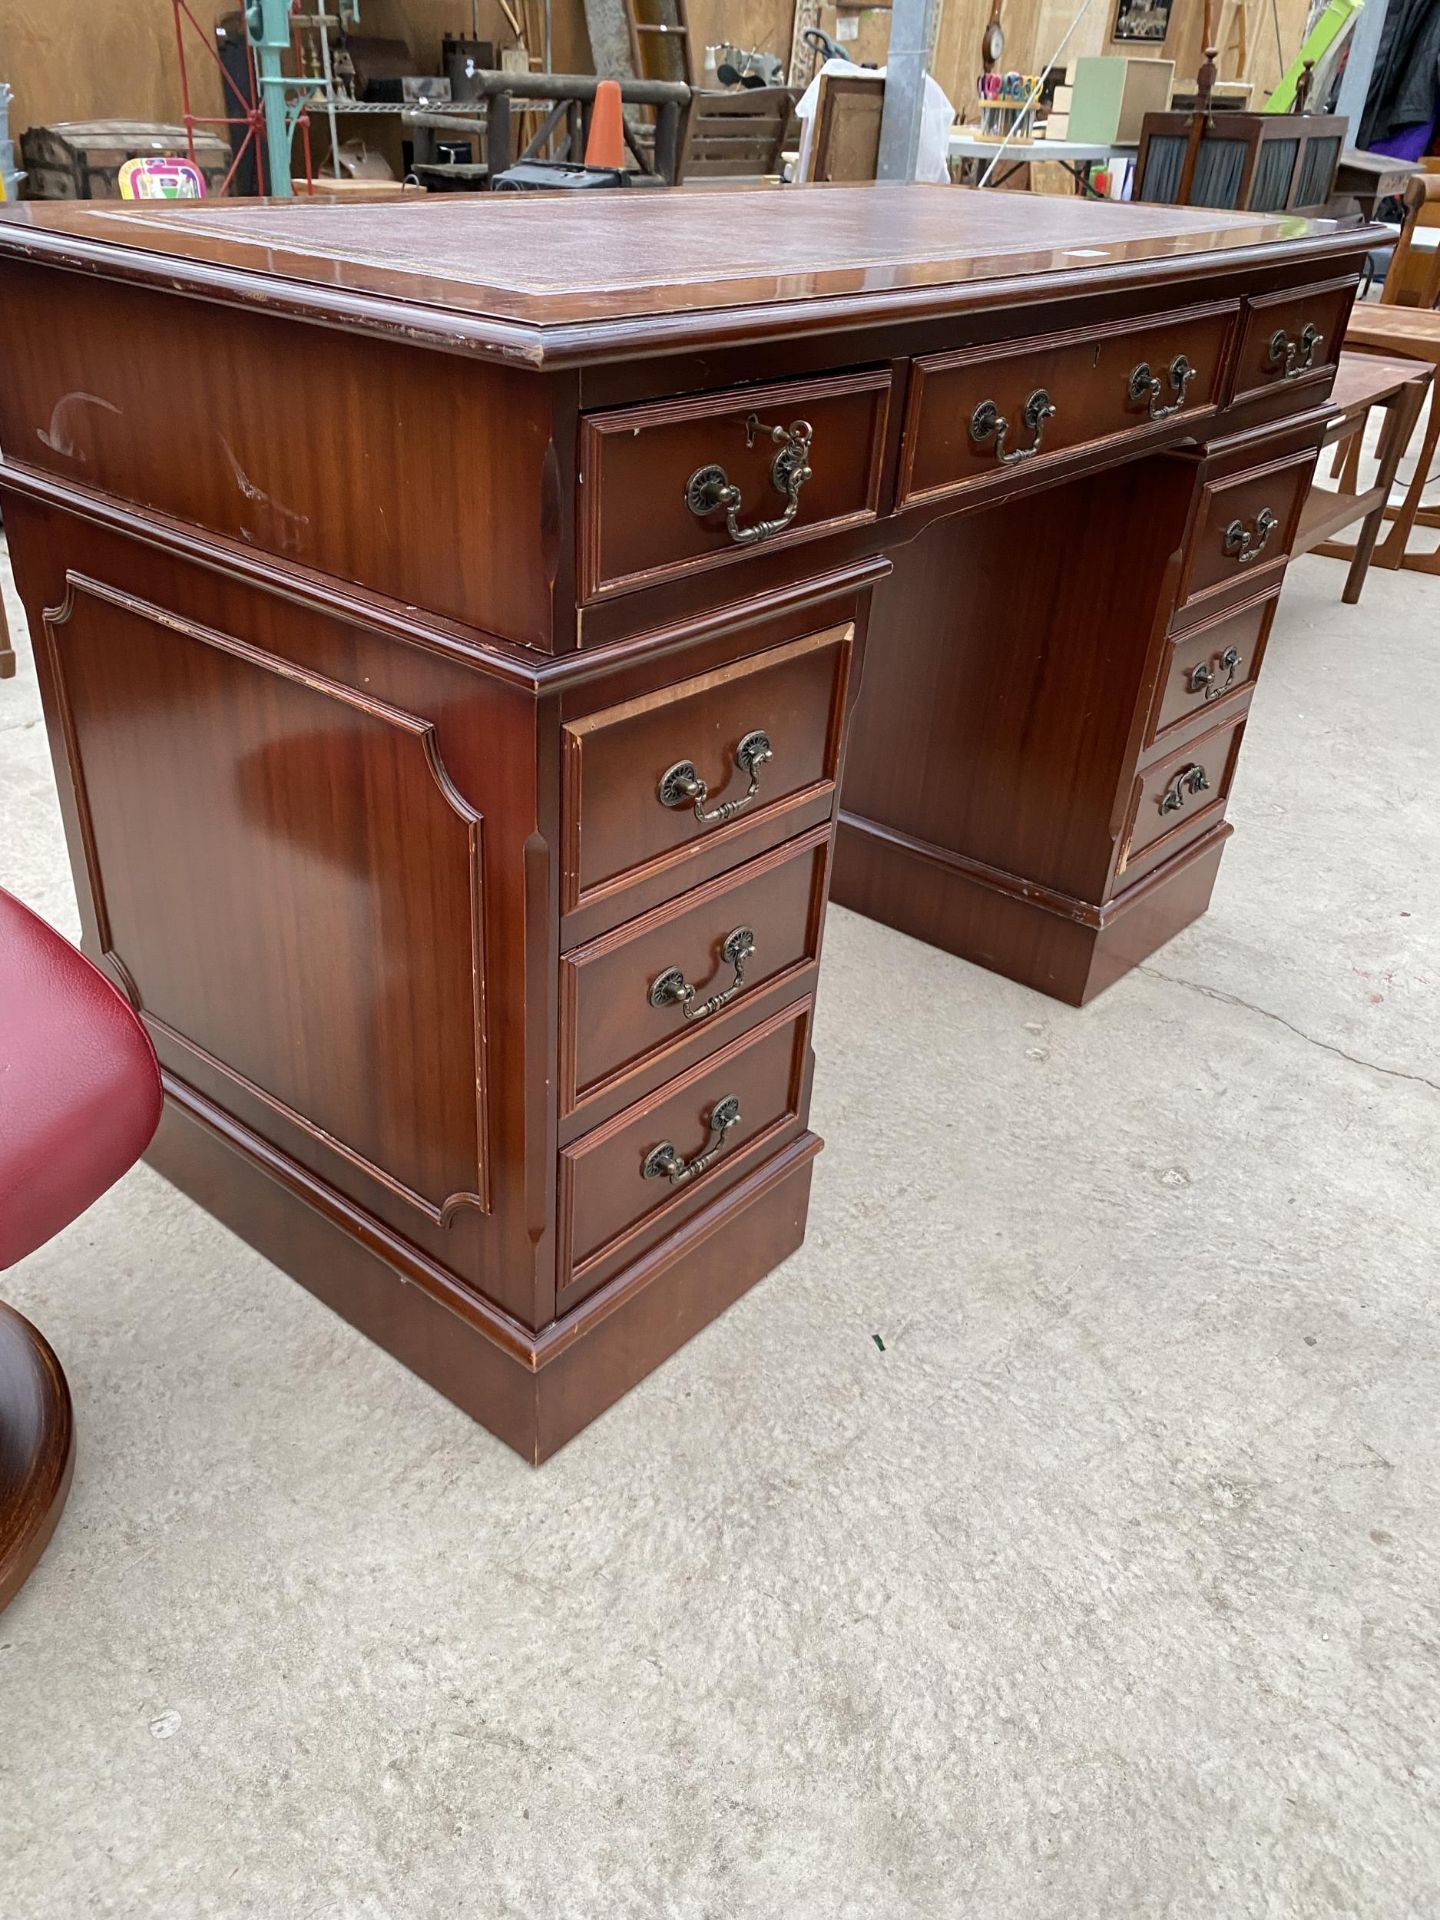 A MAHOGANY TWIN PEDESTAL DESK WITH INSET LEATHER TOP, ENCLOSING EIGHT DRAWERS, 48X24" - Image 2 of 4